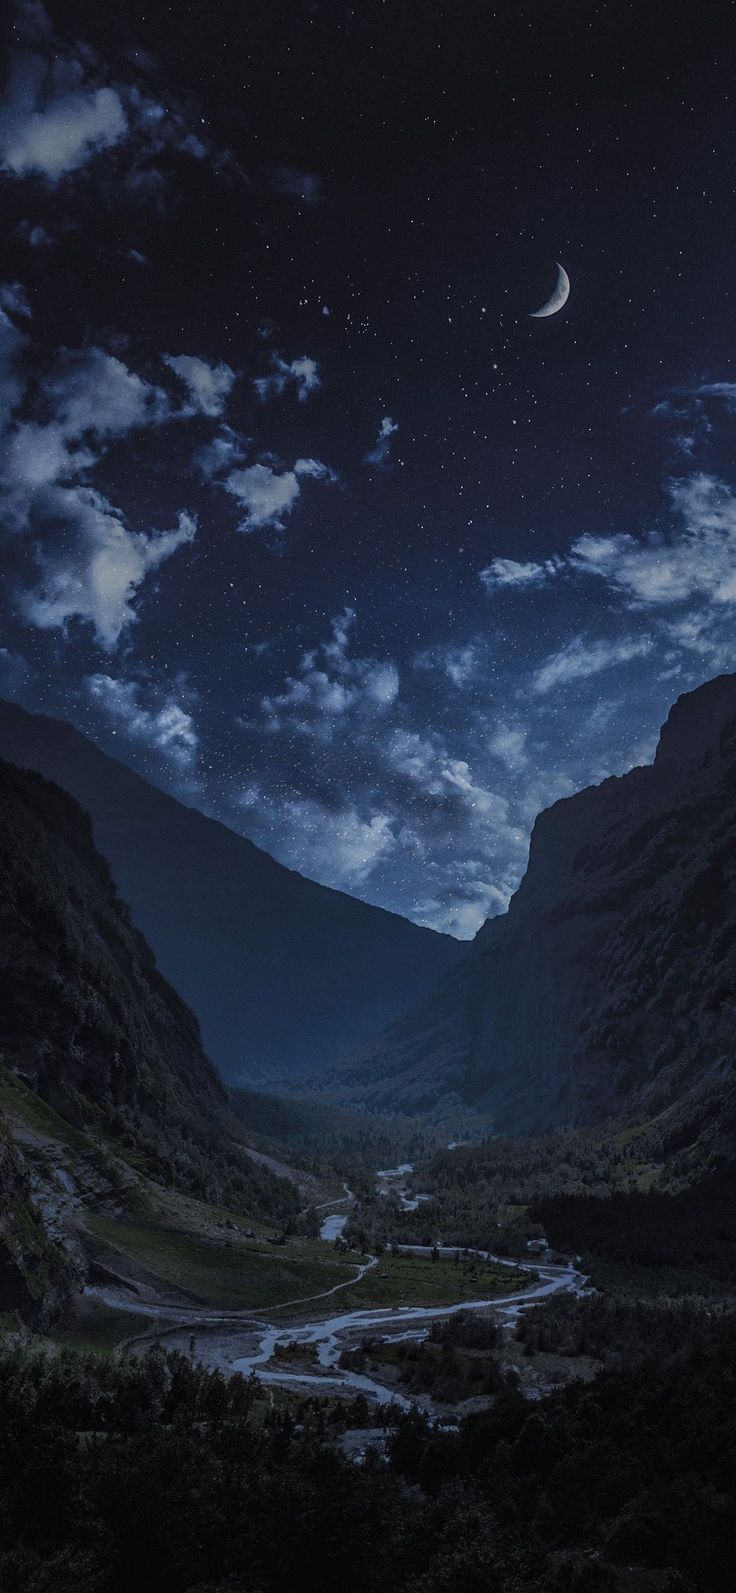 the night sky is full of stars and clouds over a mountain valley with a river running through it